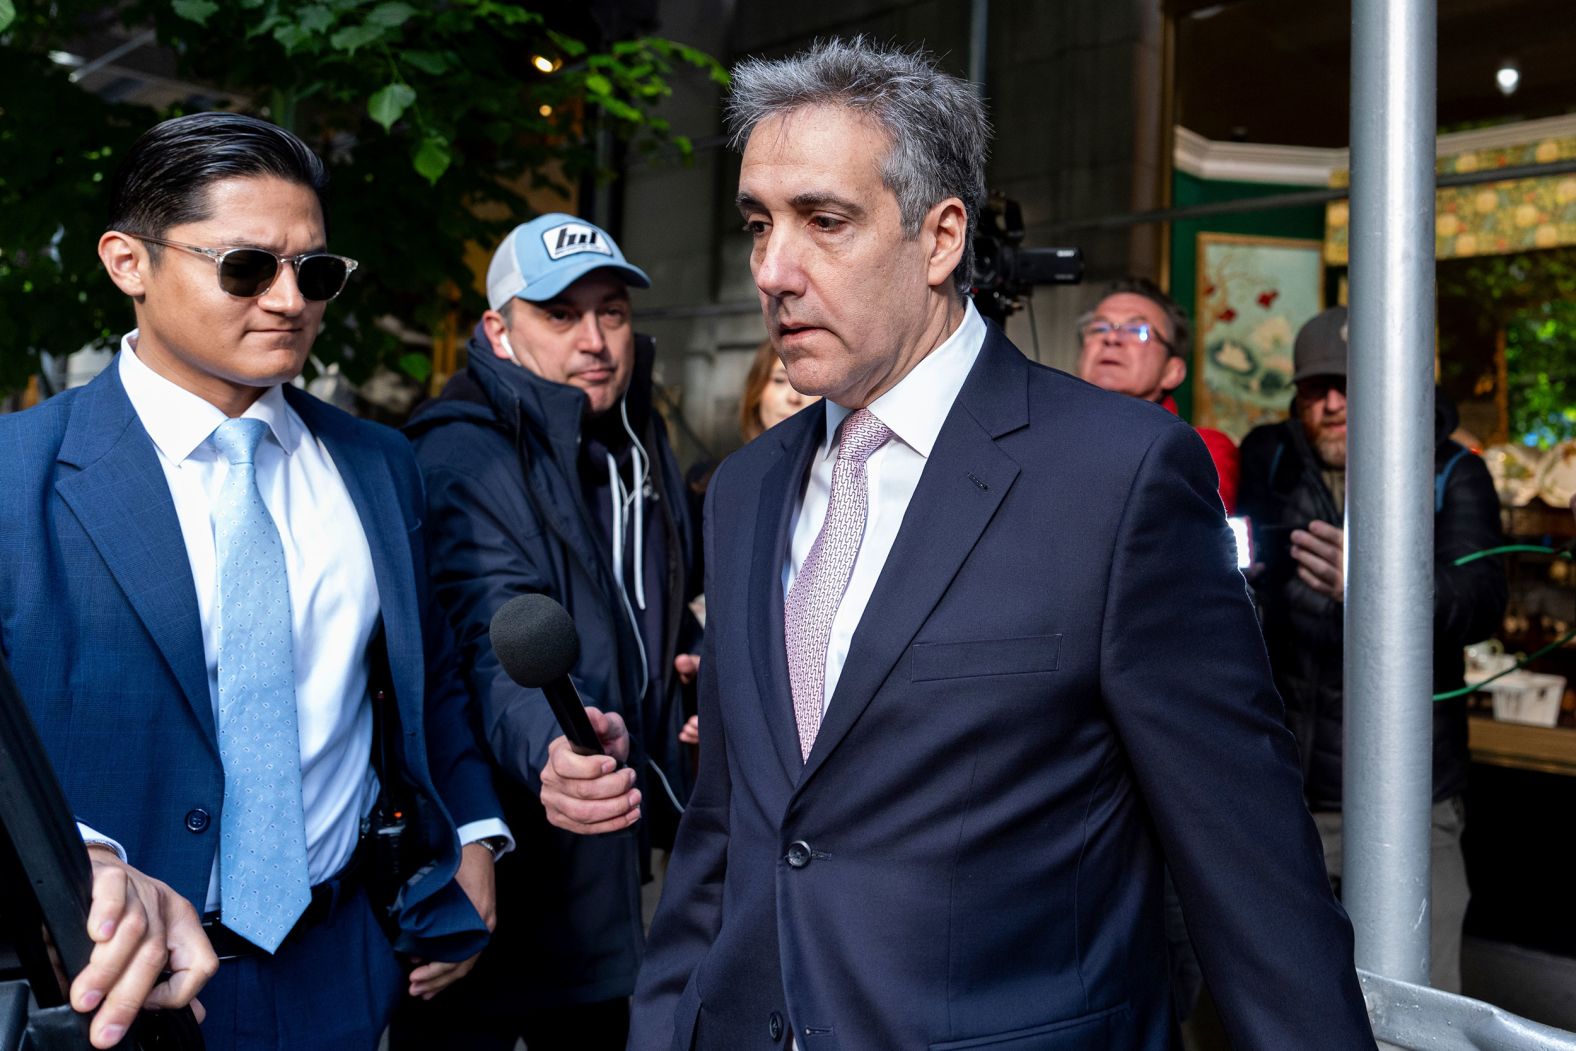 Michael Cohen, Trump's former personal attorney, leaves his apartment building in New York on his way to court on May 13. <a href="index.php?page=&url=https%3A%2F%2Fwww.cnn.com%2Fpolitics%2Flive-news%2Ftrump-hush-money-trial-05-16-24%2Findex.html" target="_blank">Cohen testified</a> that Trump directed him to pay hush money to Stormy Daniels in the final days of the 2016 presidential campaign.